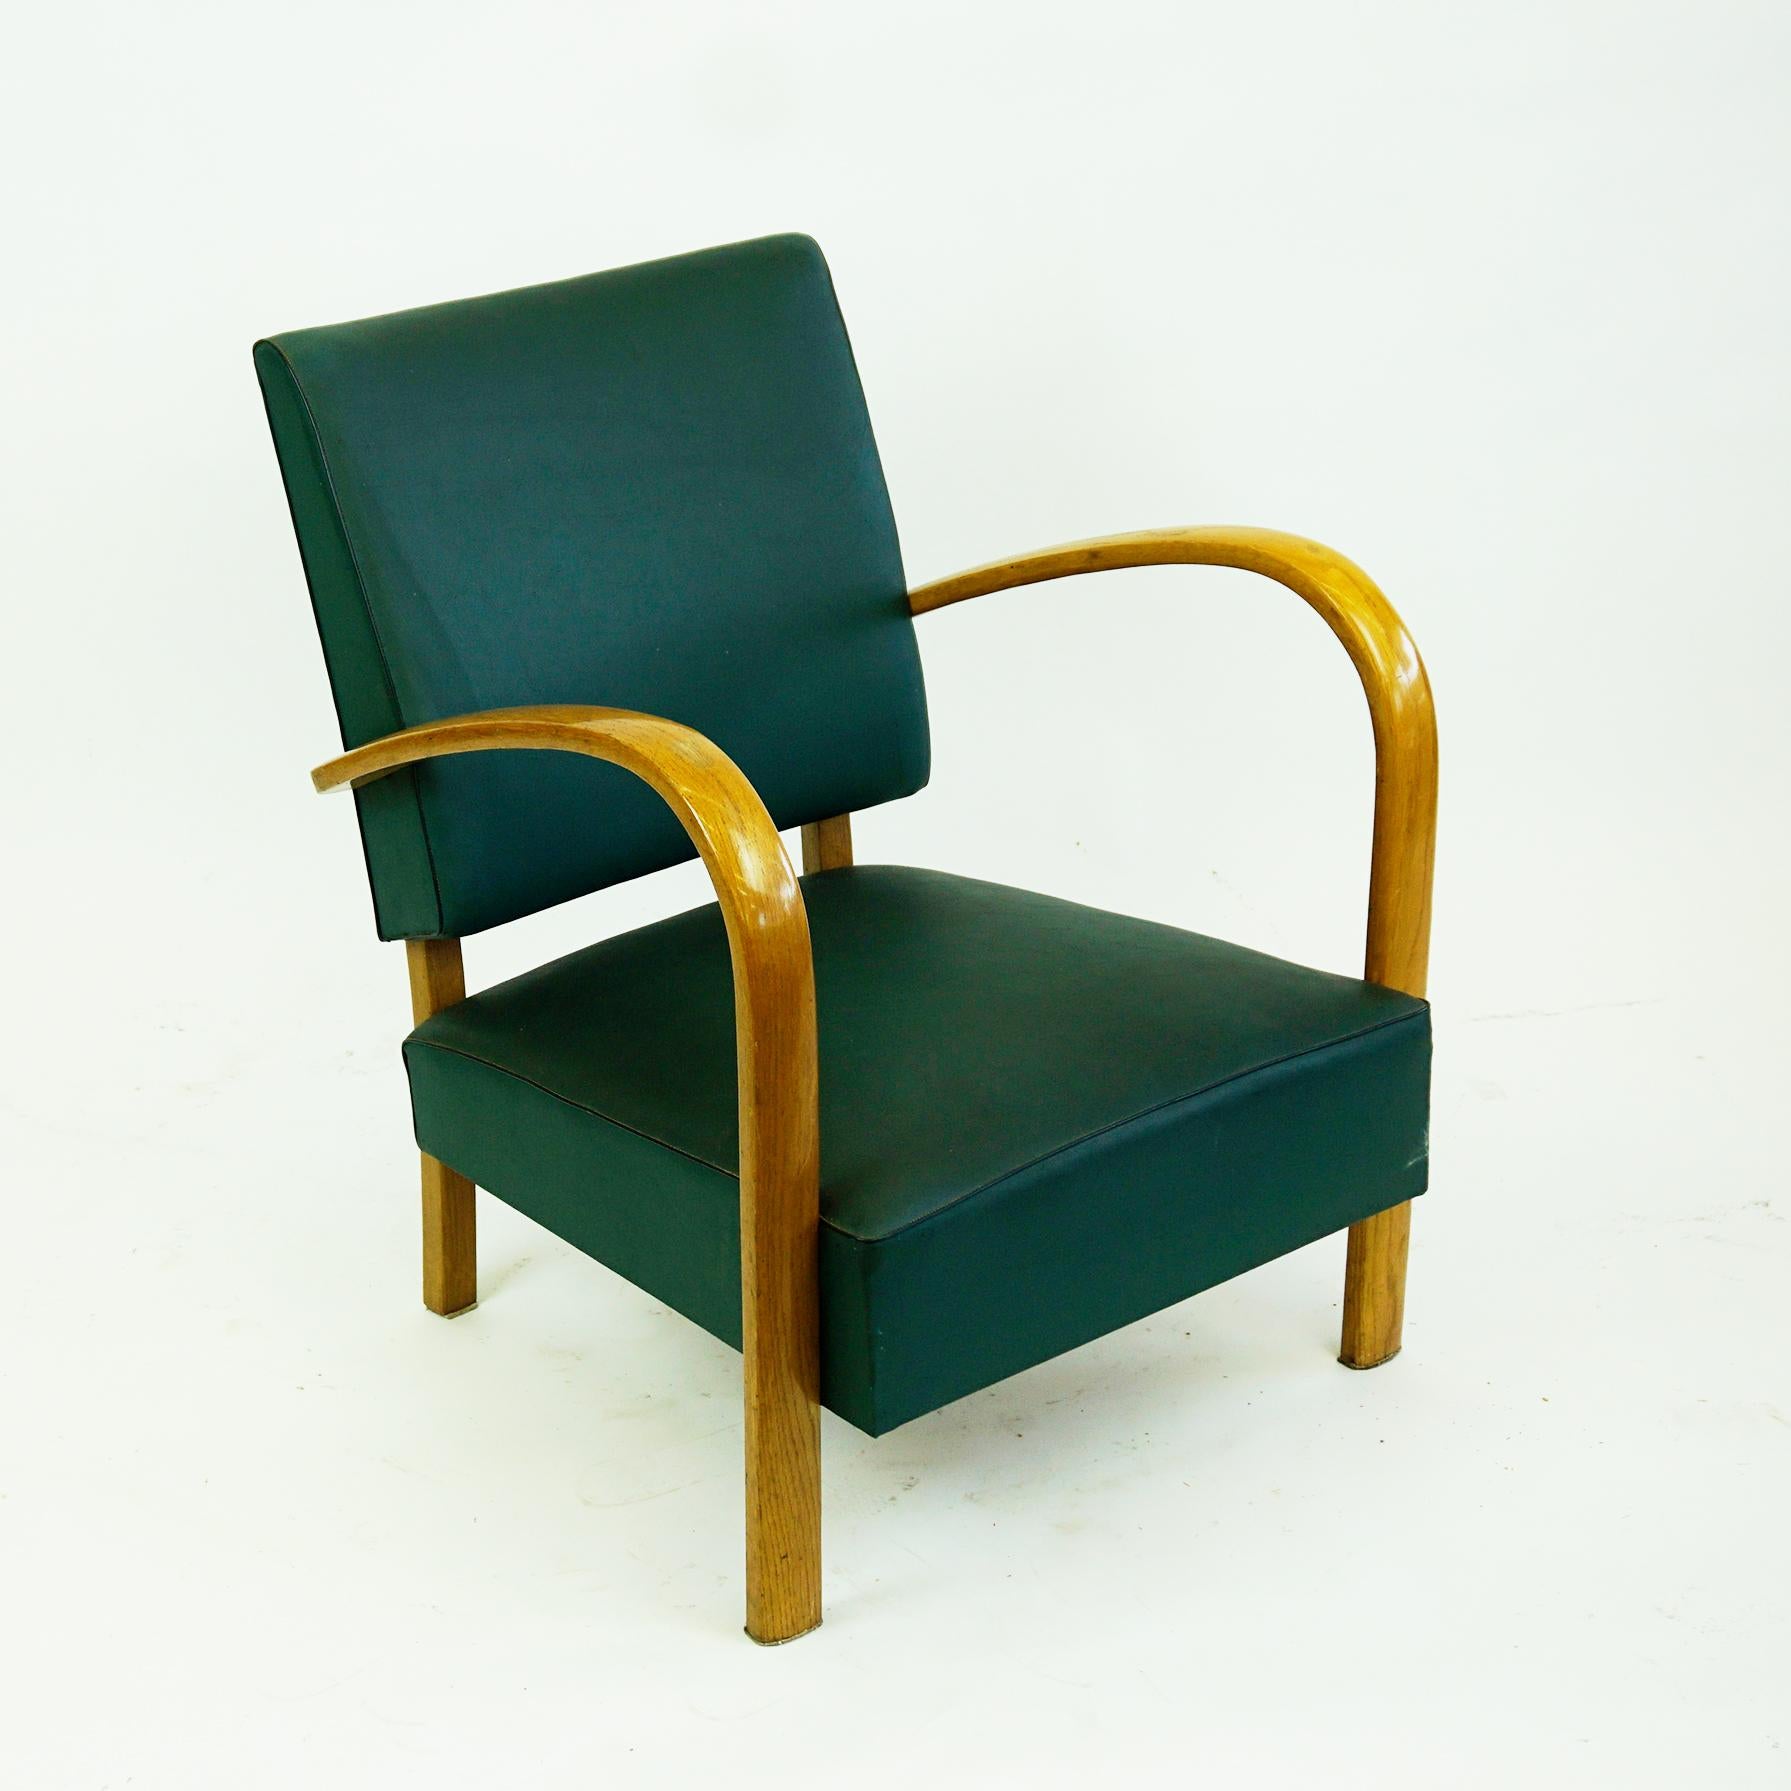 Italian Midcentury Beech Lounge Chair with Green Leatherette In Good Condition For Sale In Vienna, AT